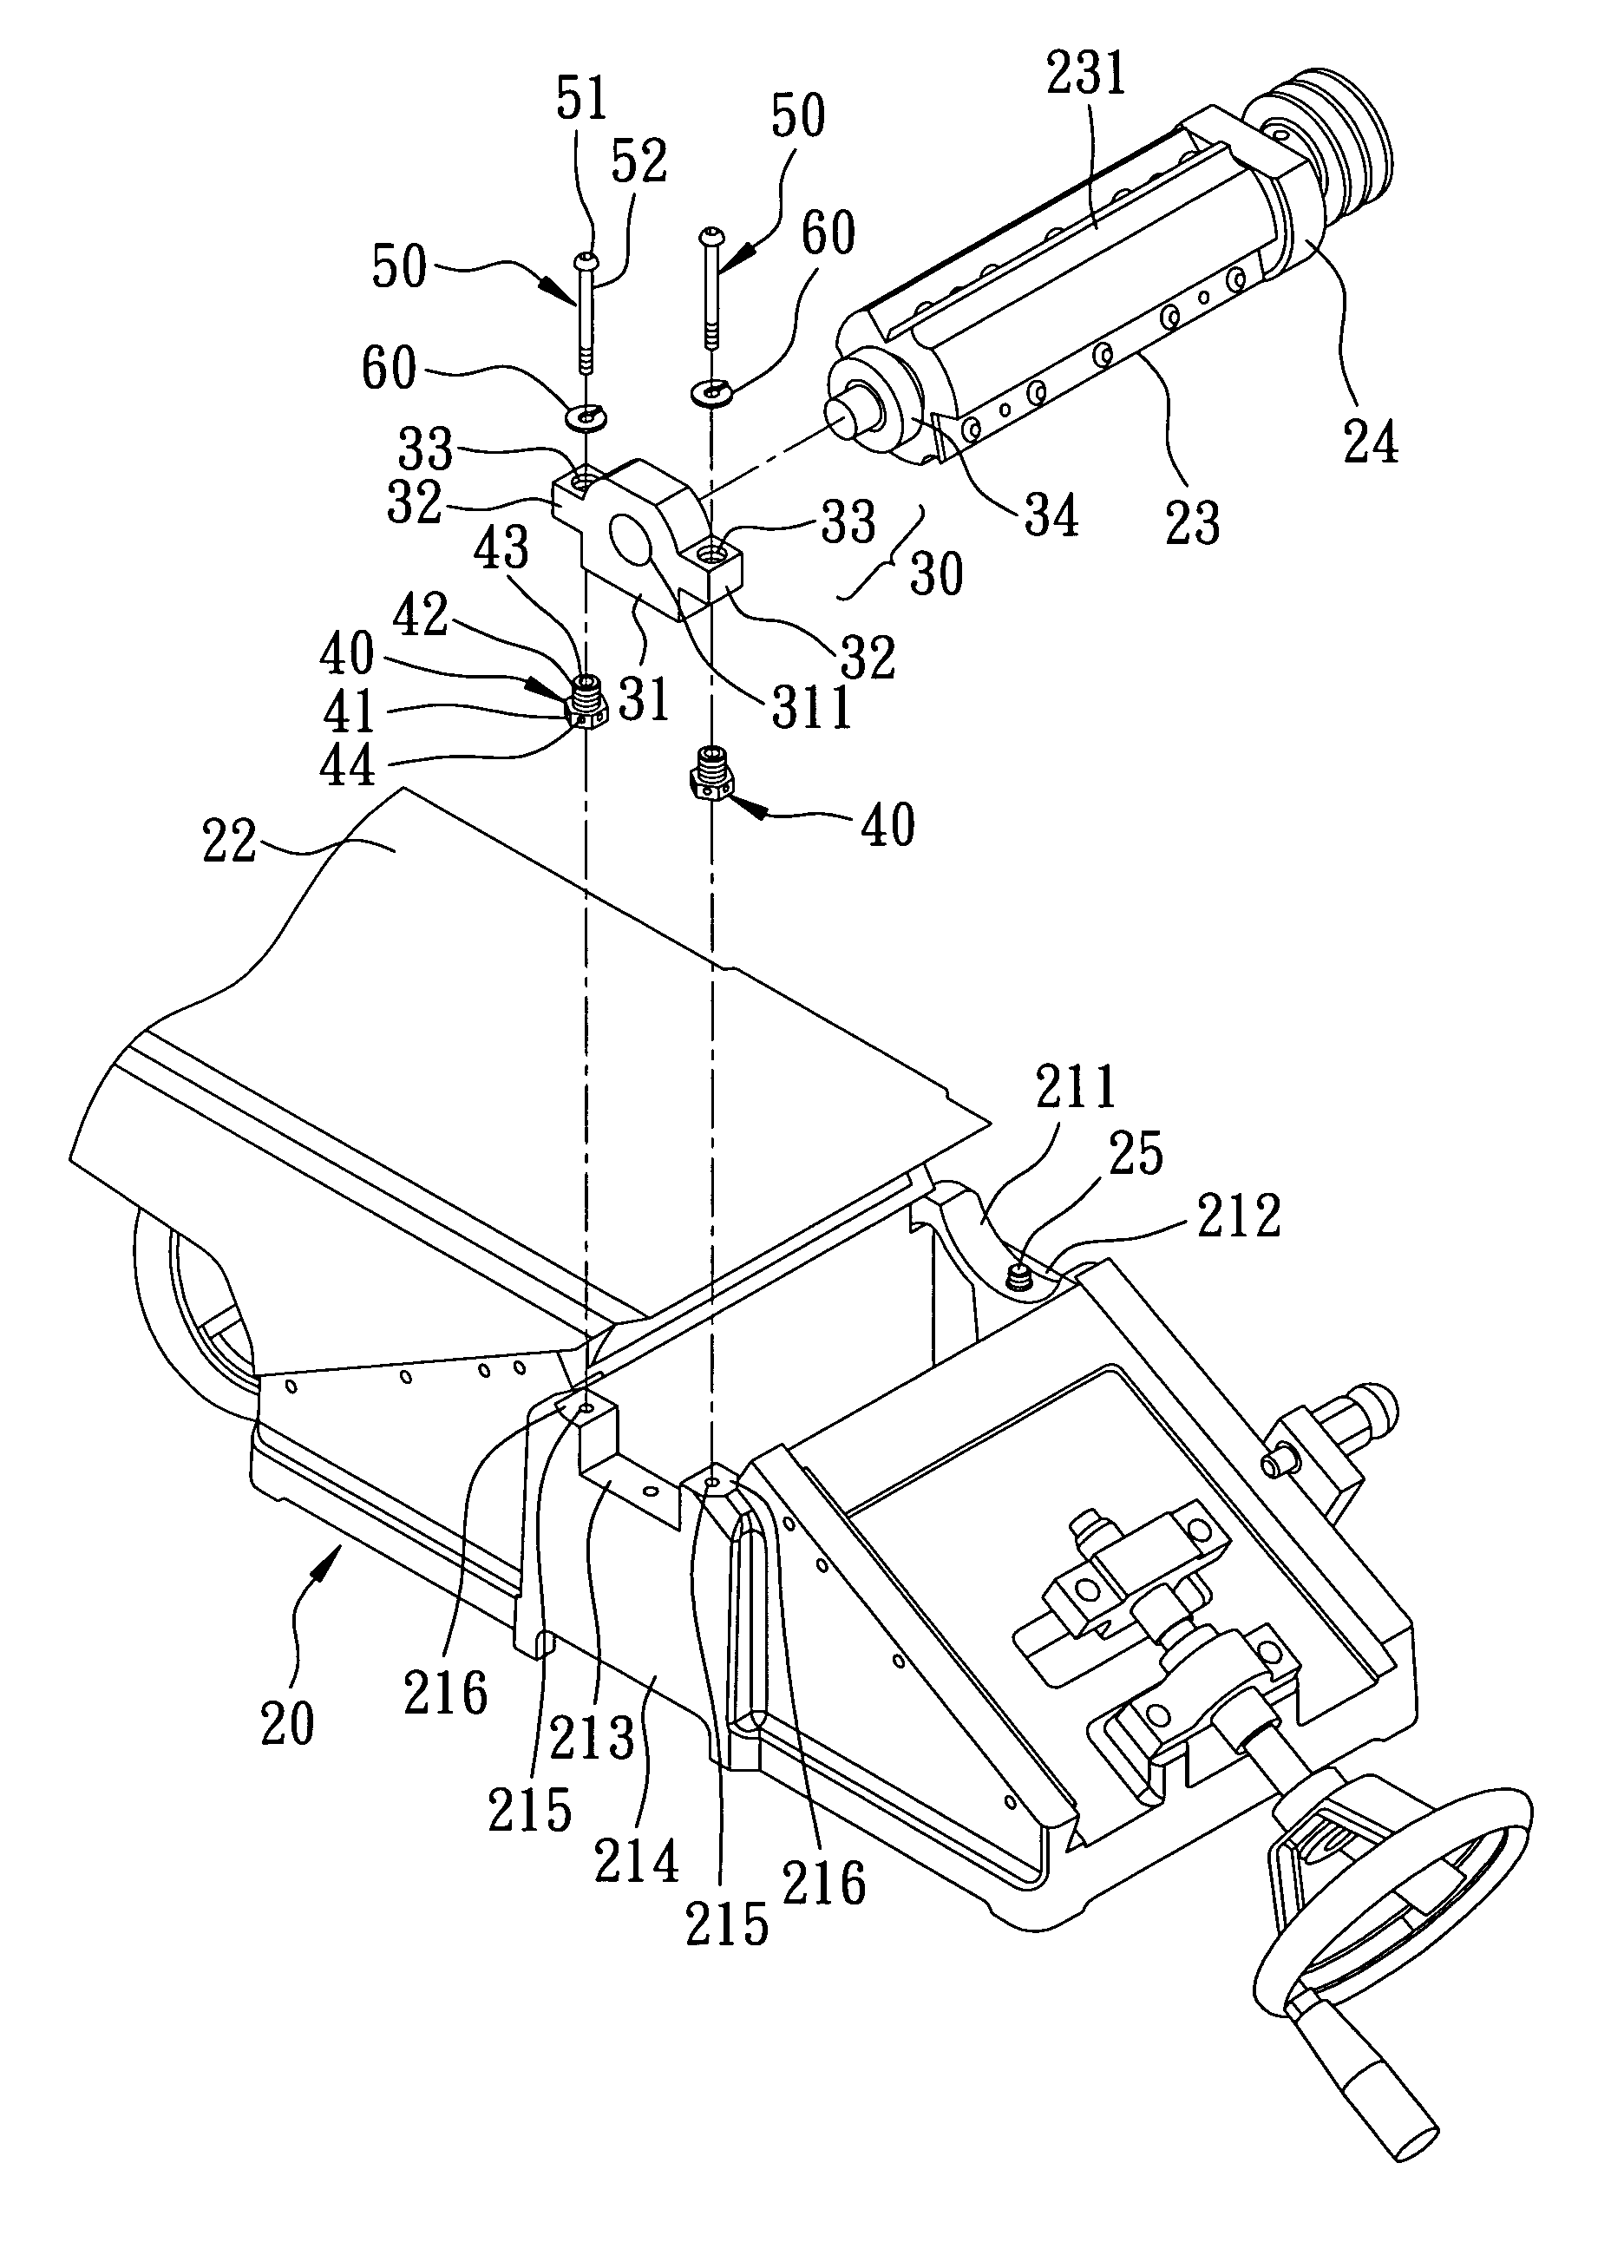 Level adjusting device for a cutter head of a jointer/planer machine